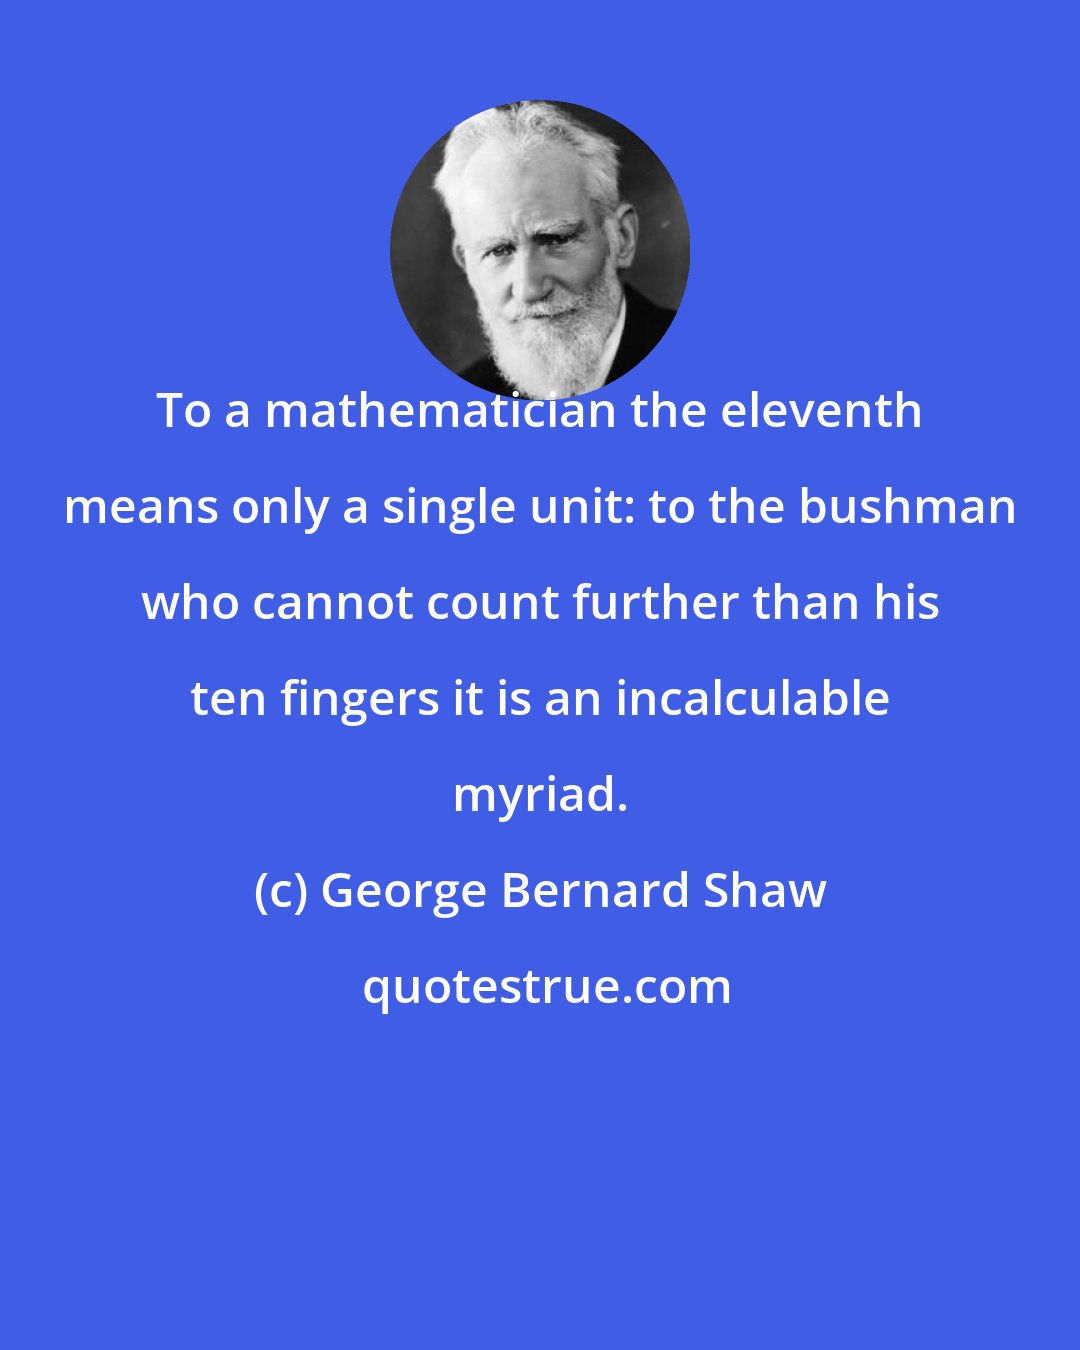 George Bernard Shaw: To a mathematician the eleventh means only a single unit: to the bushman who cannot count further than his ten fingers it is an incalculable myriad.